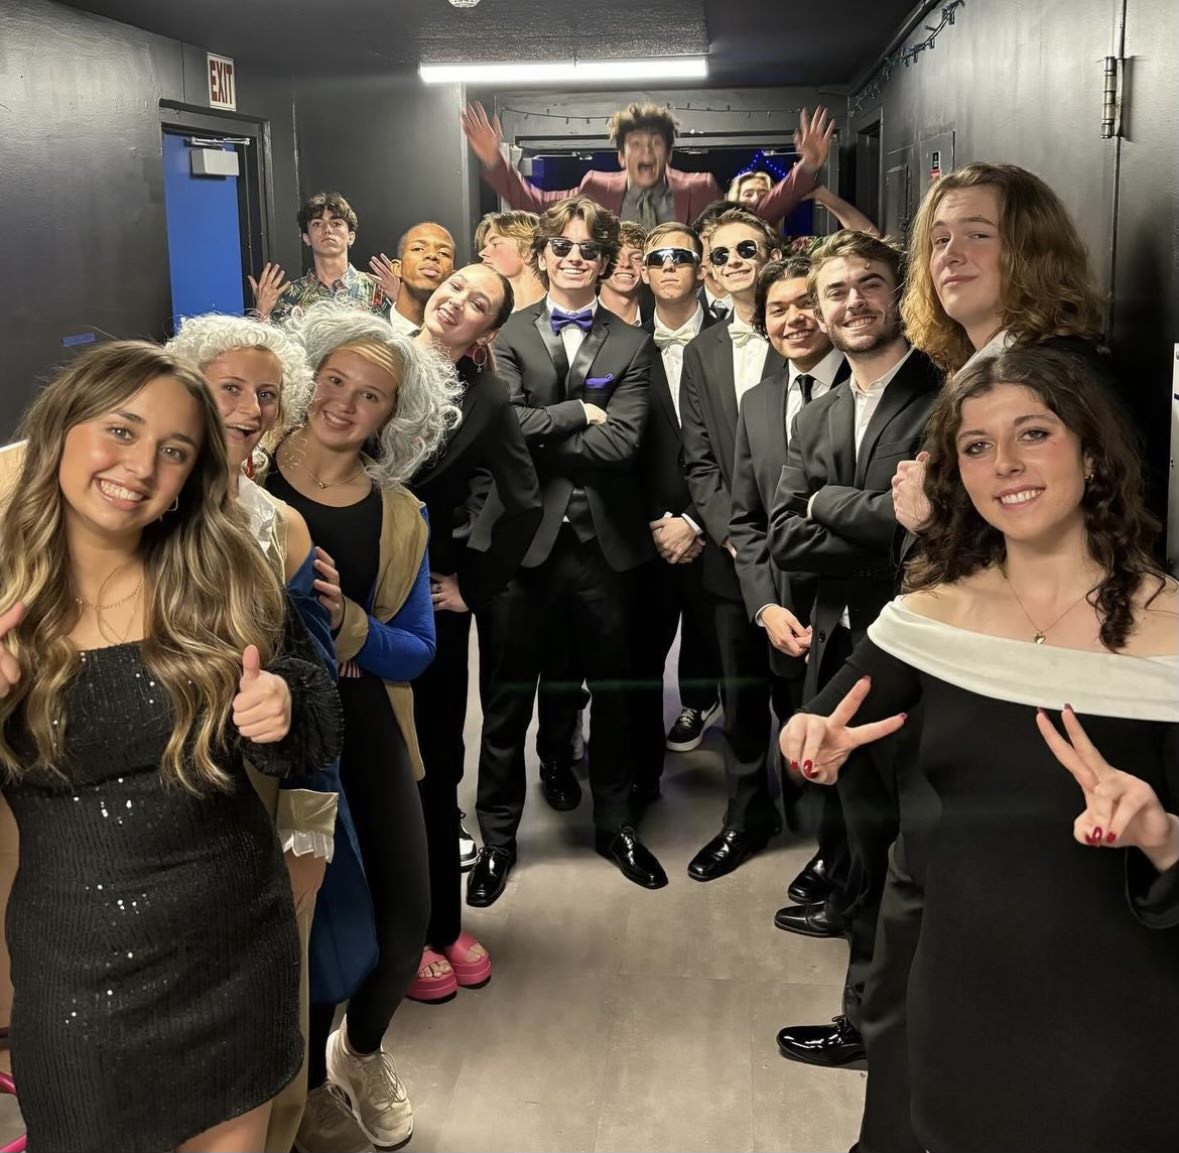 The Top Griffin candidates and their escorts pose for a group photo backstage. Im feeling excited, grateful for the opportunity, and so excited to see how the rest of senior year goes, said candidate Philip Pinto.